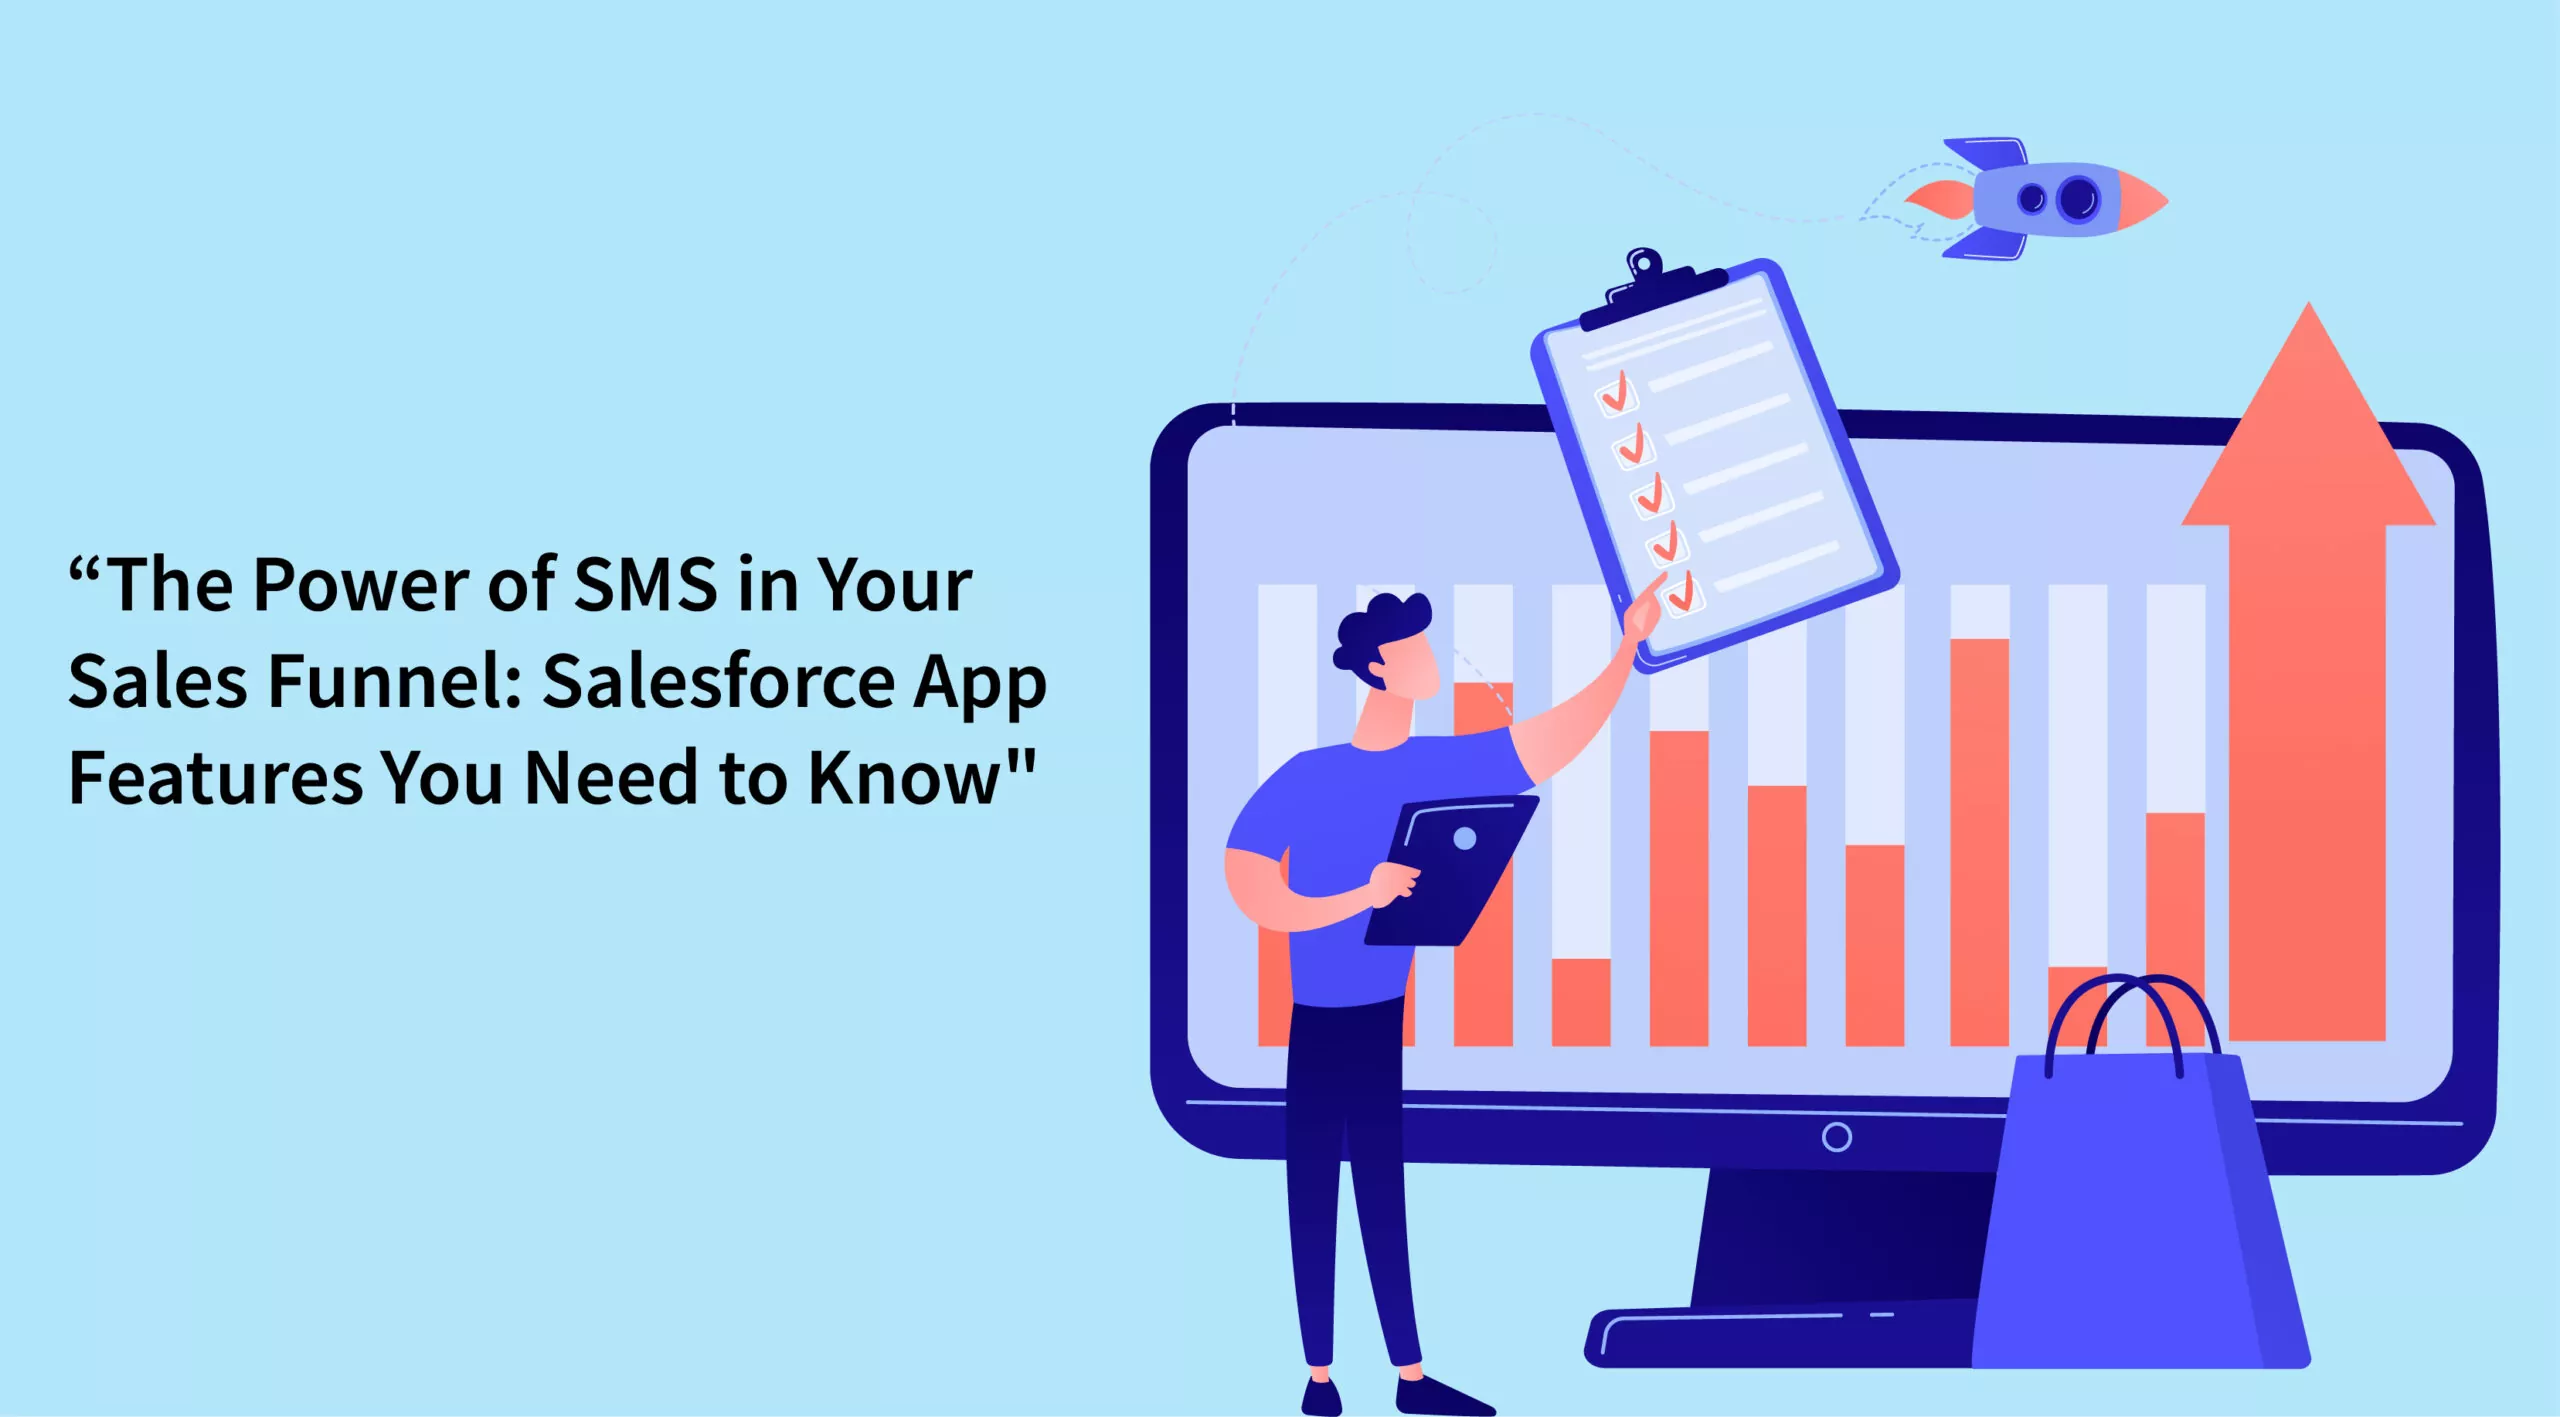 “The Power of SMS in Your Sales Funnel: Salesforce App Features You Need to Know”